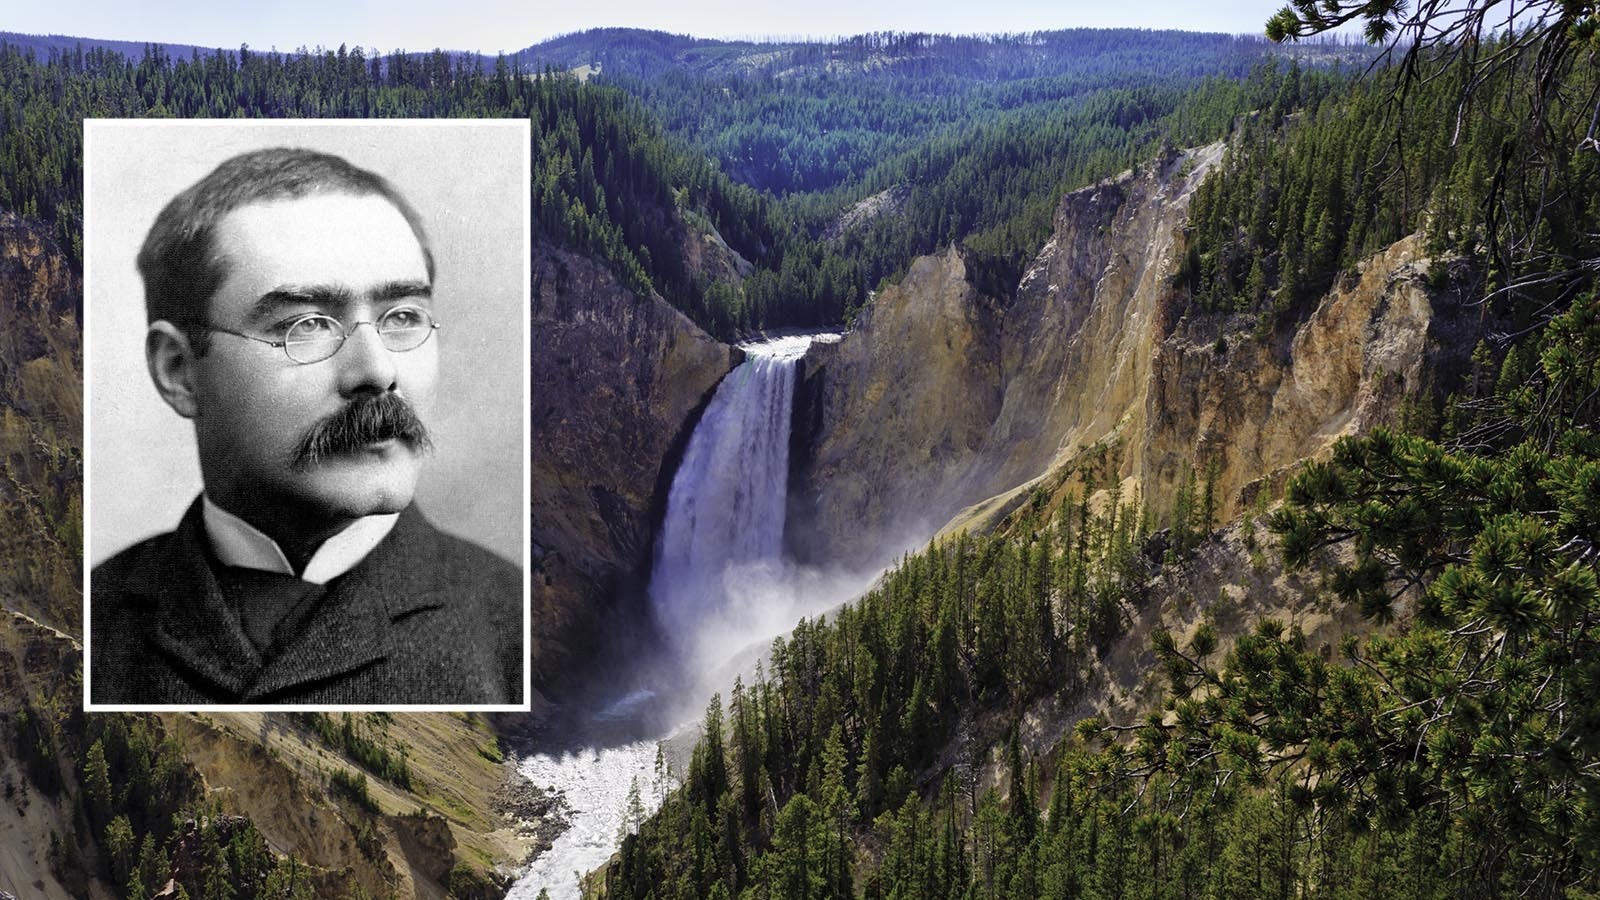 When Rudyard Kipling visited Yellowstone National Park, he wasn't impressed, writing that, "Today I am in the Yellowstone Park, and I wish I were dead."